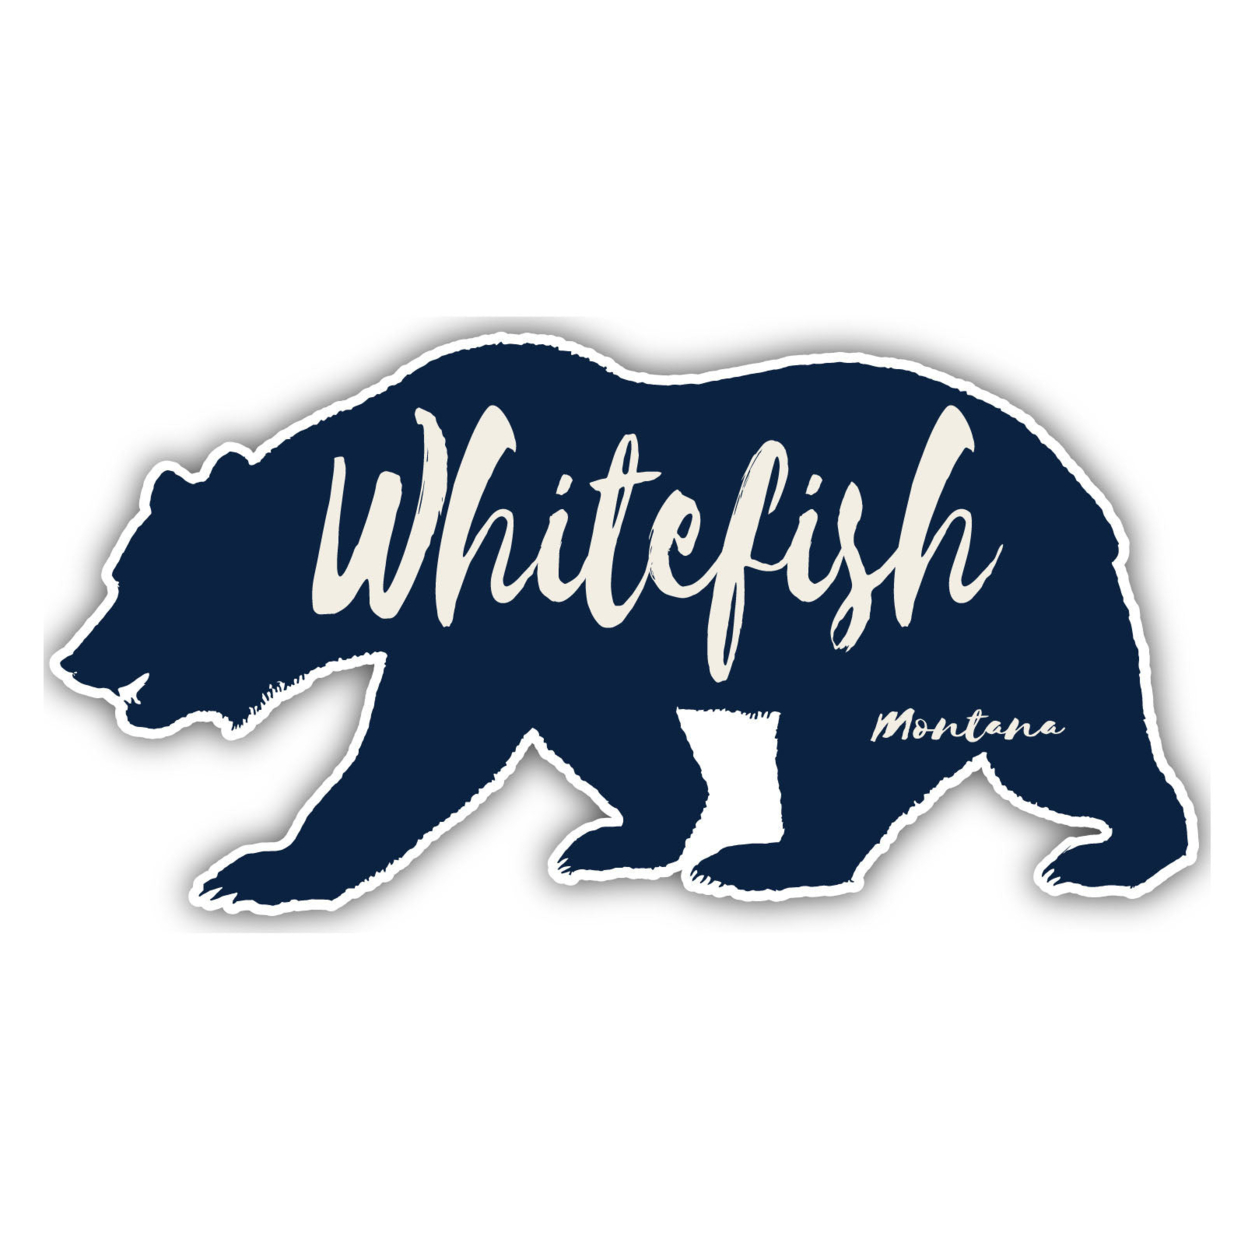 Whitefish Montana Souvenir Decorative Stickers (Choose Theme And Size) - Single Unit, 4-Inch, Great Outdoors